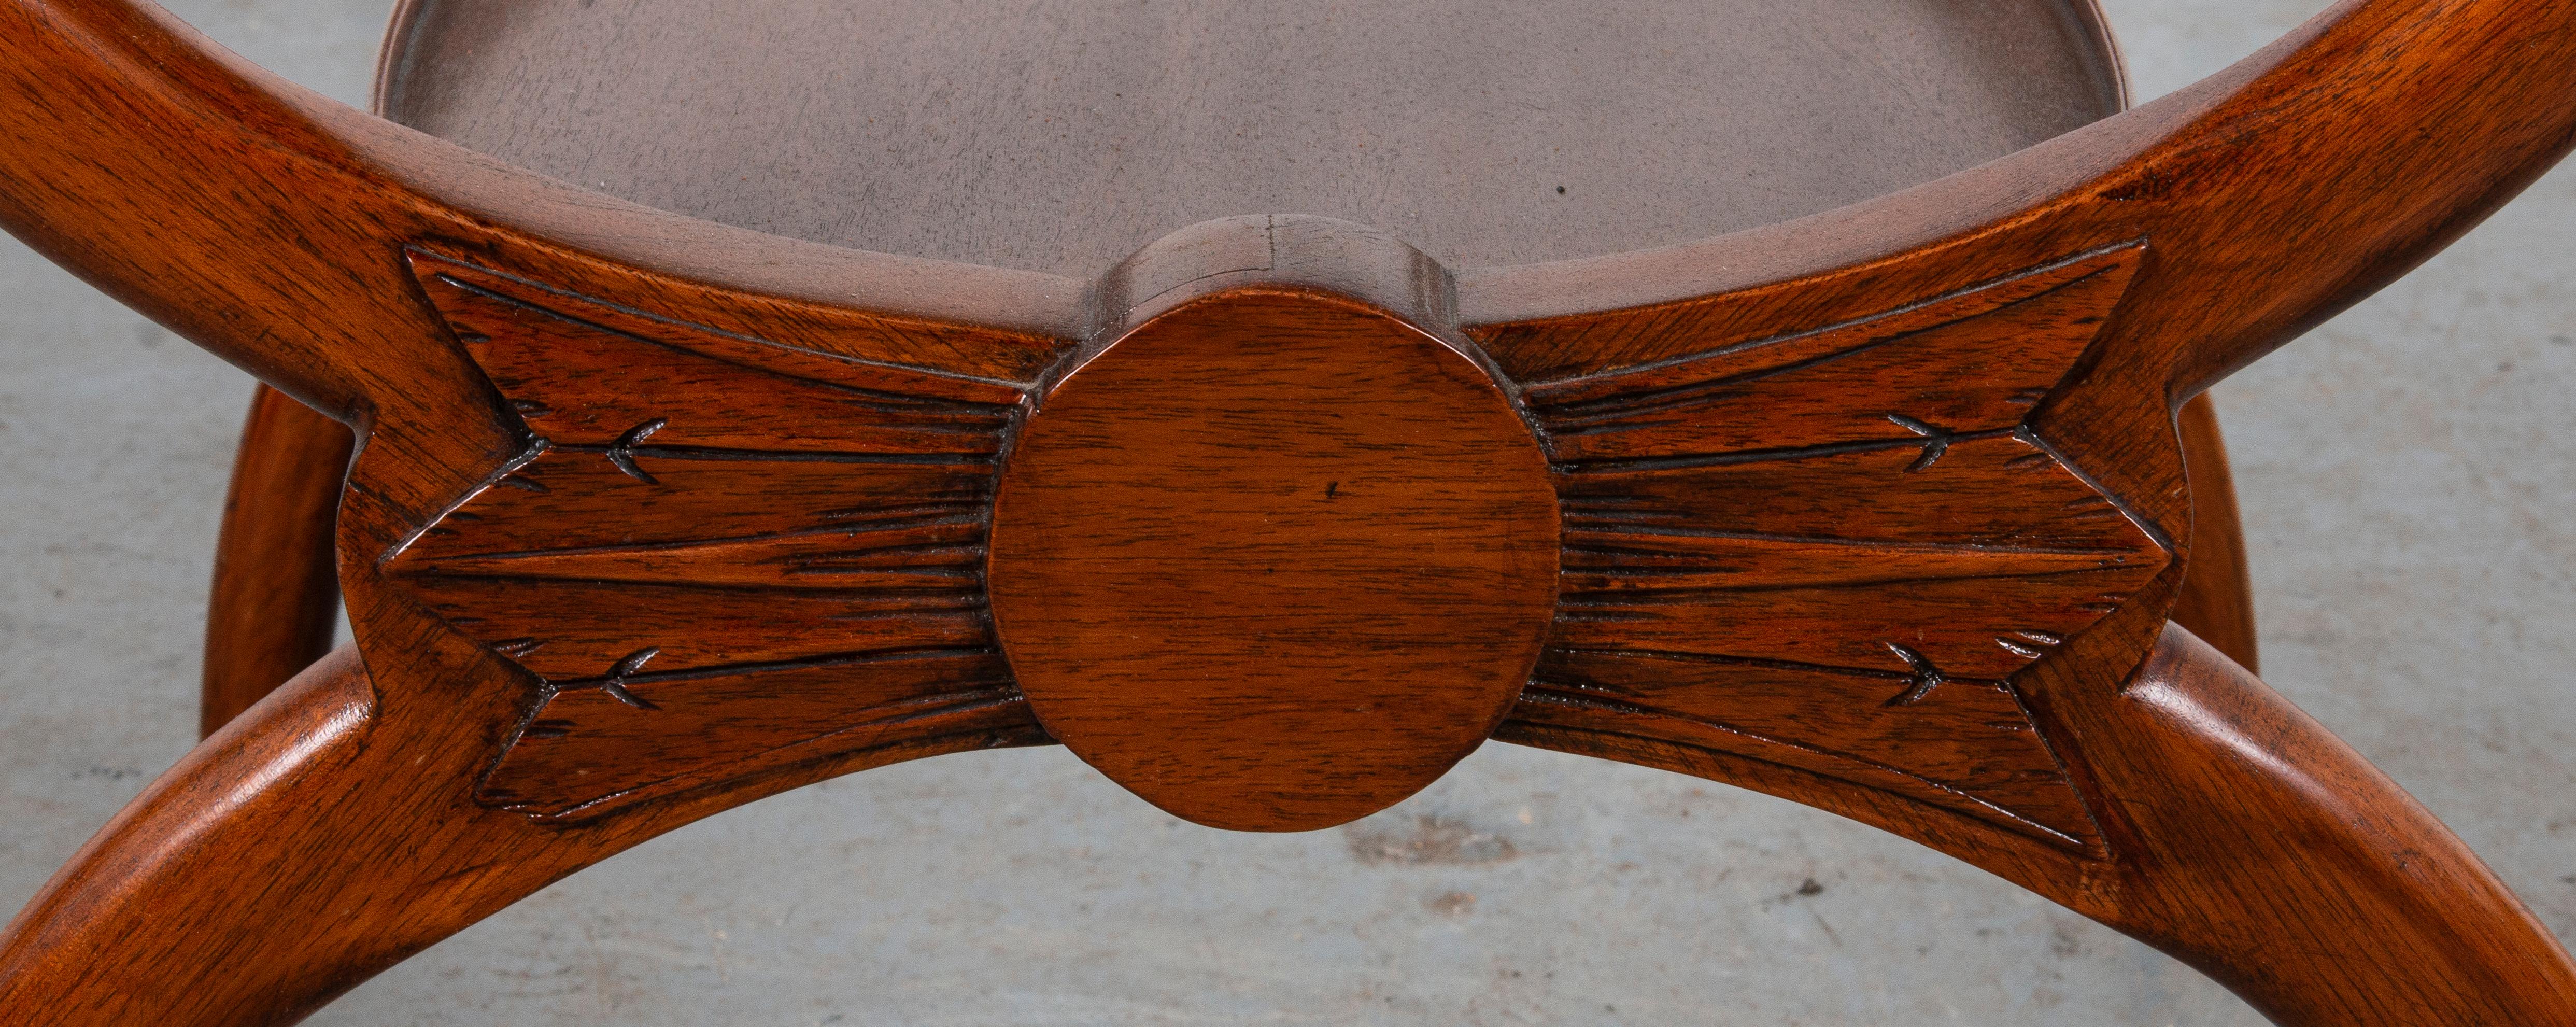 Regency Manner Inlaid Occasional Table 1